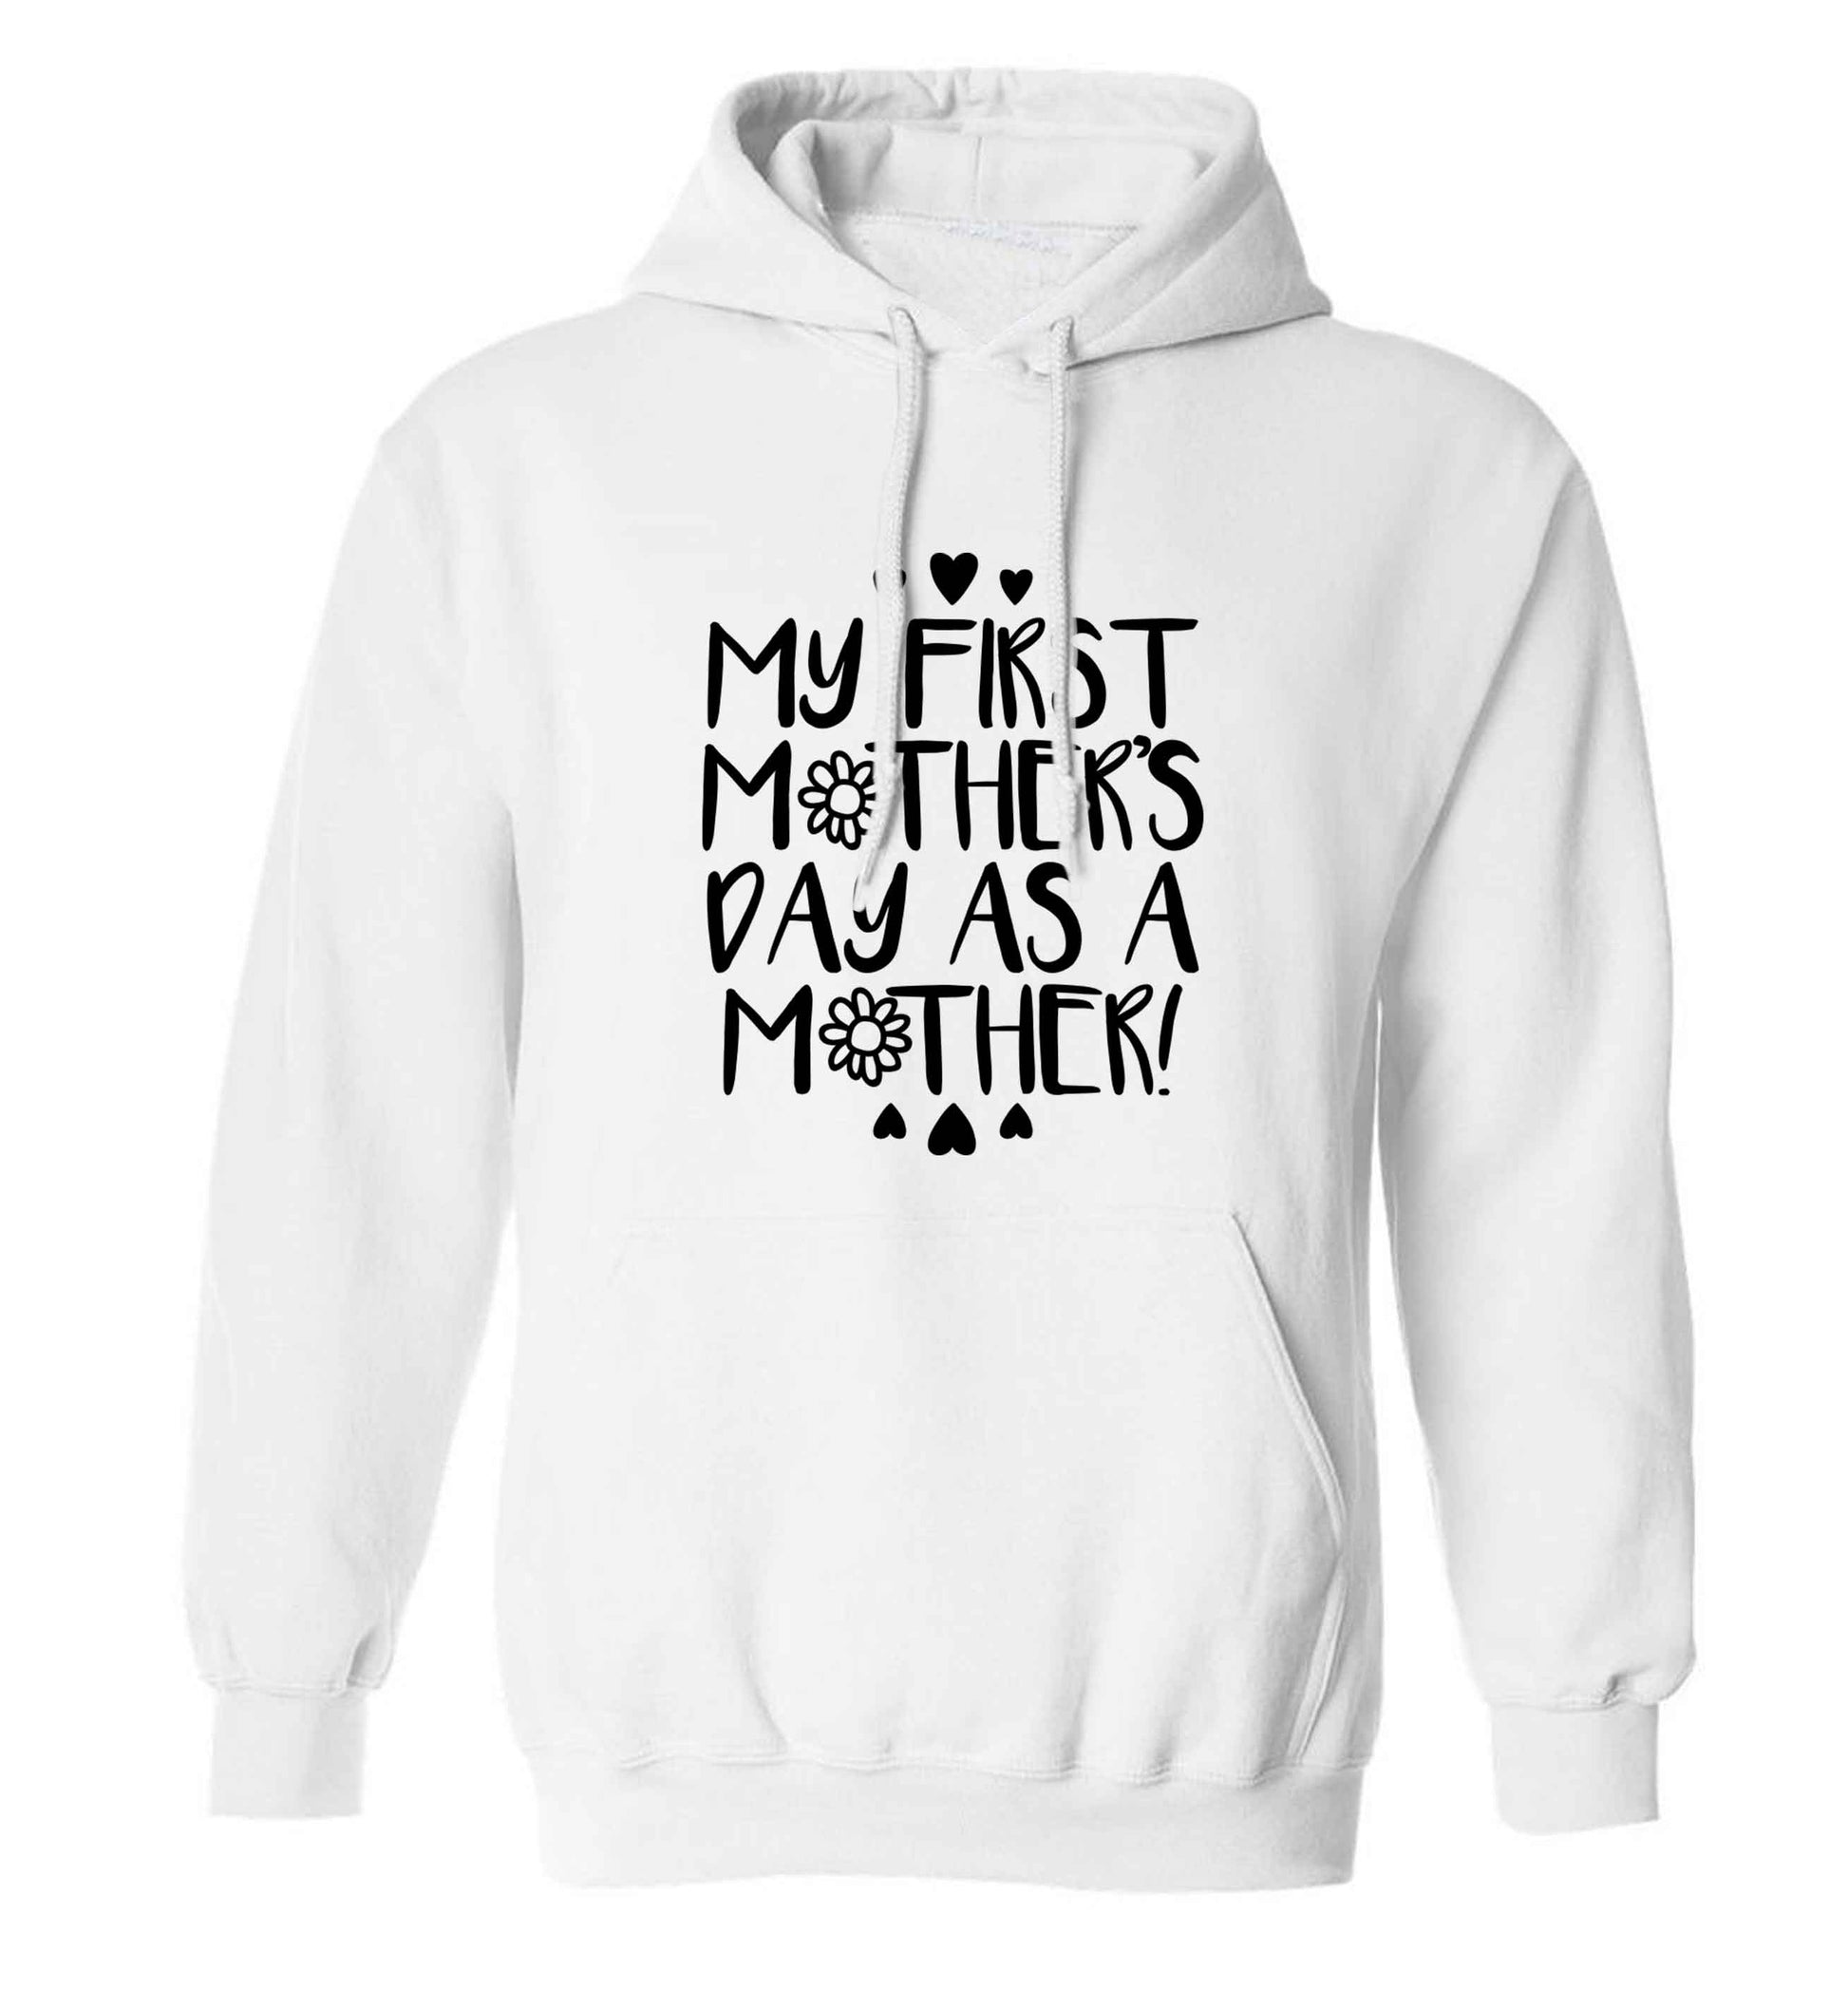 It's my first mother's day as a mother adults unisex white hoodie 2XL